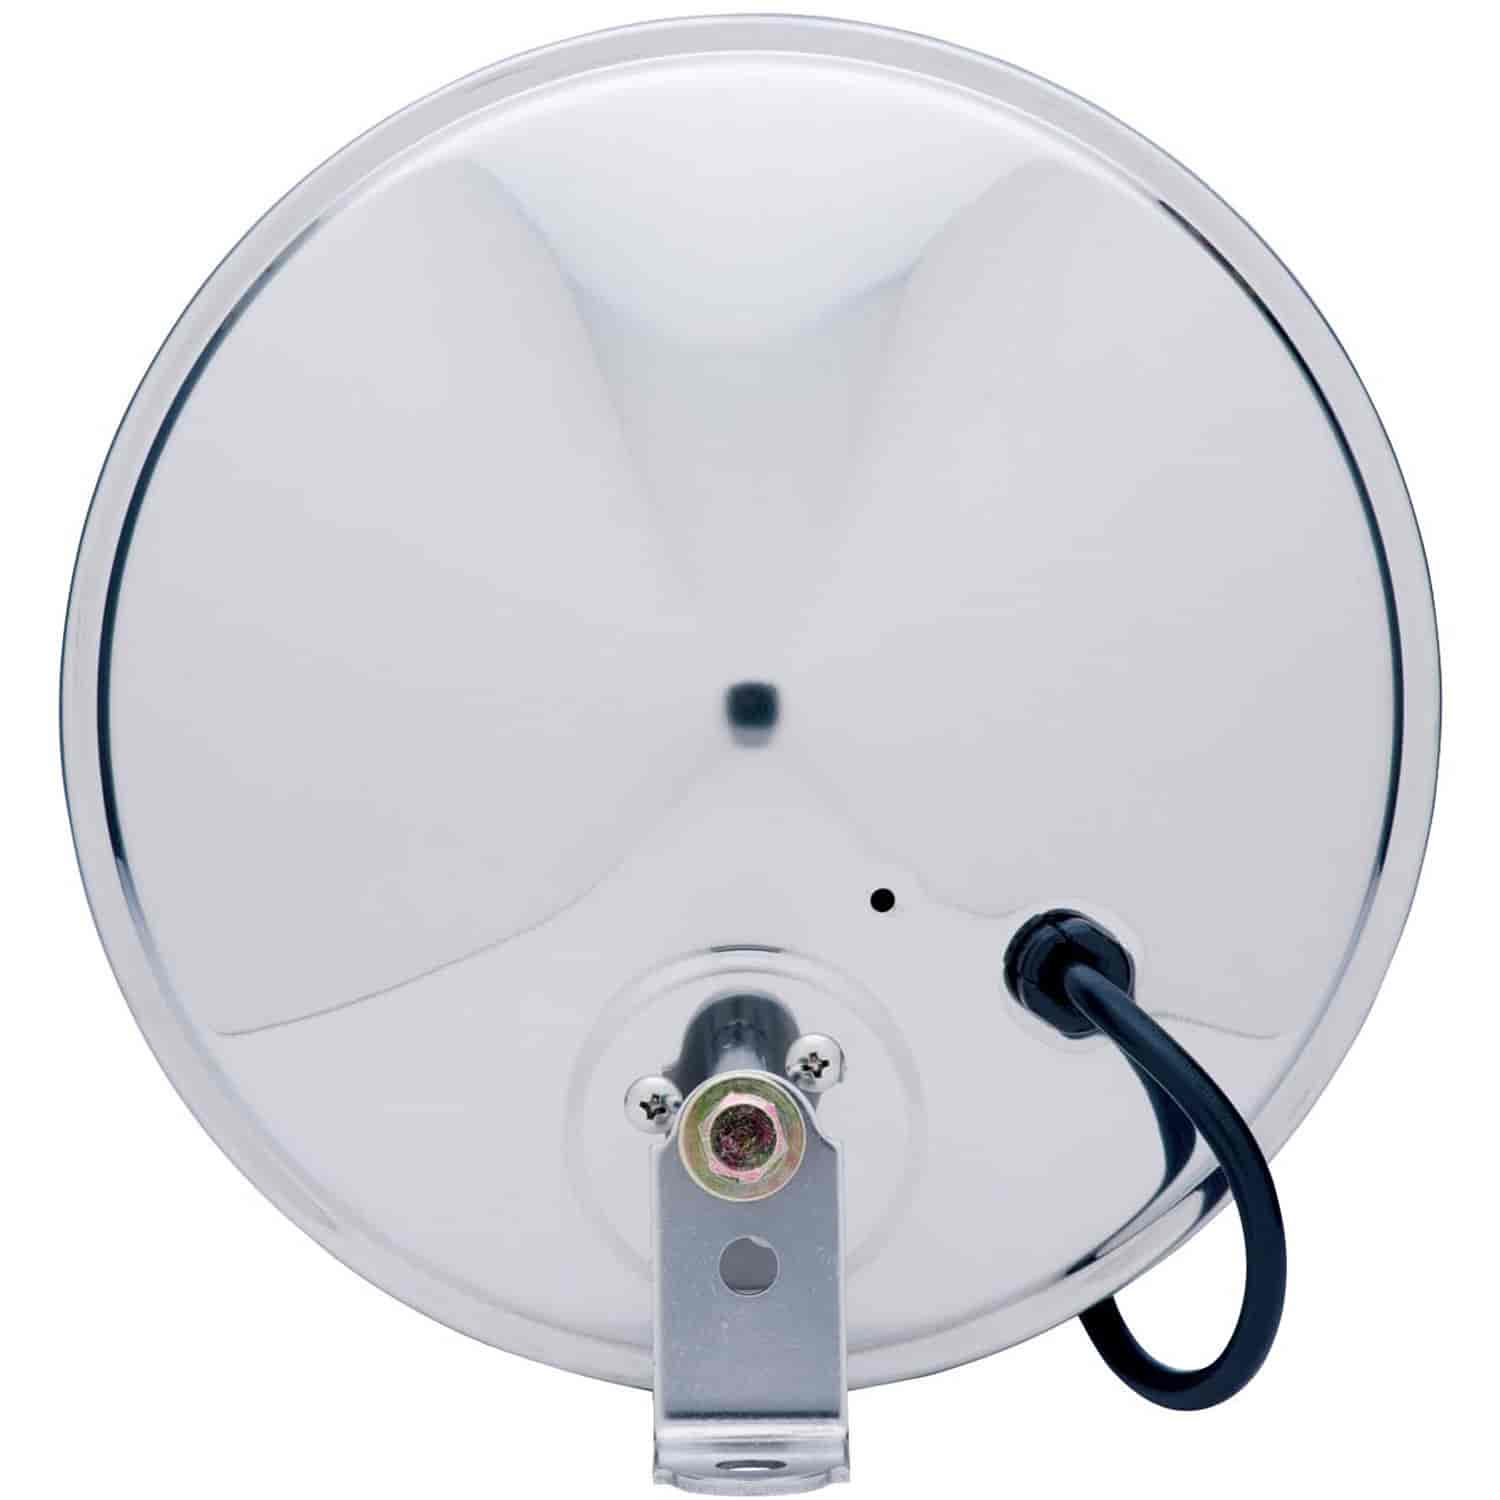 Clamp on Spot Mirror HD 8 1/2 round convex SS offset heated Easy Clamp-on Installation Convex Lens increases visibility.